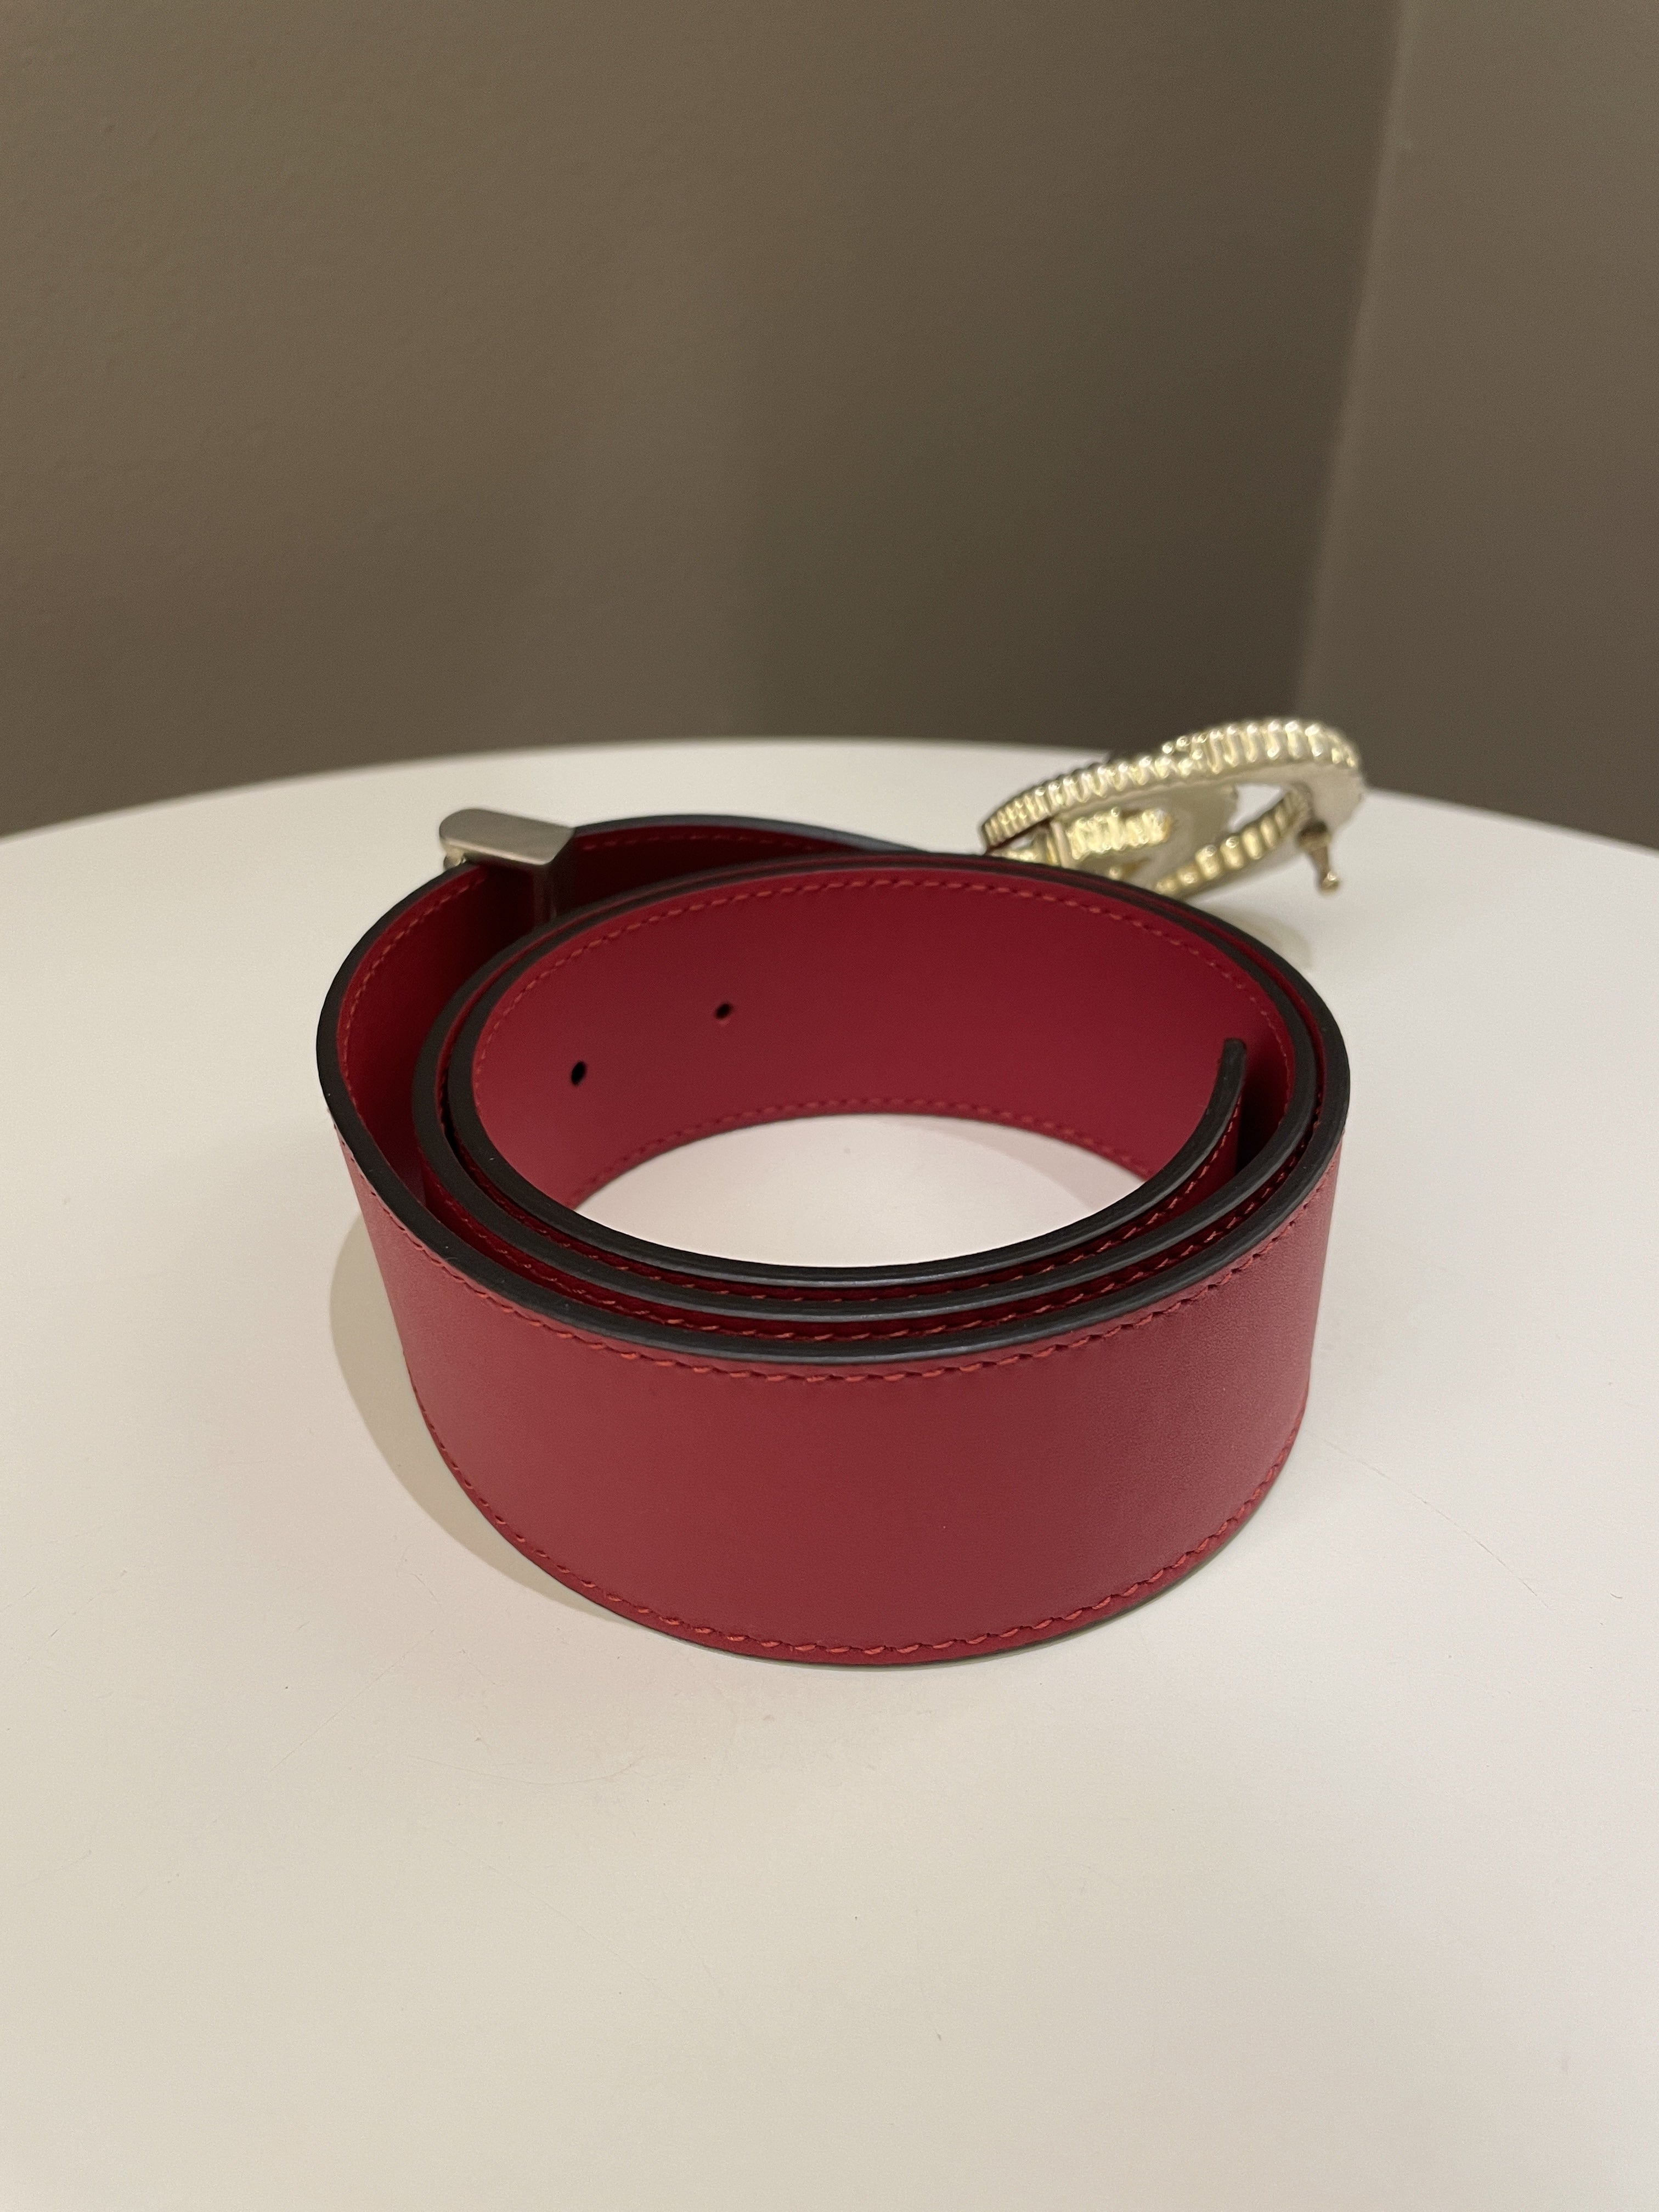 Gucci Torchon Double G Belt
Hibiscus Red